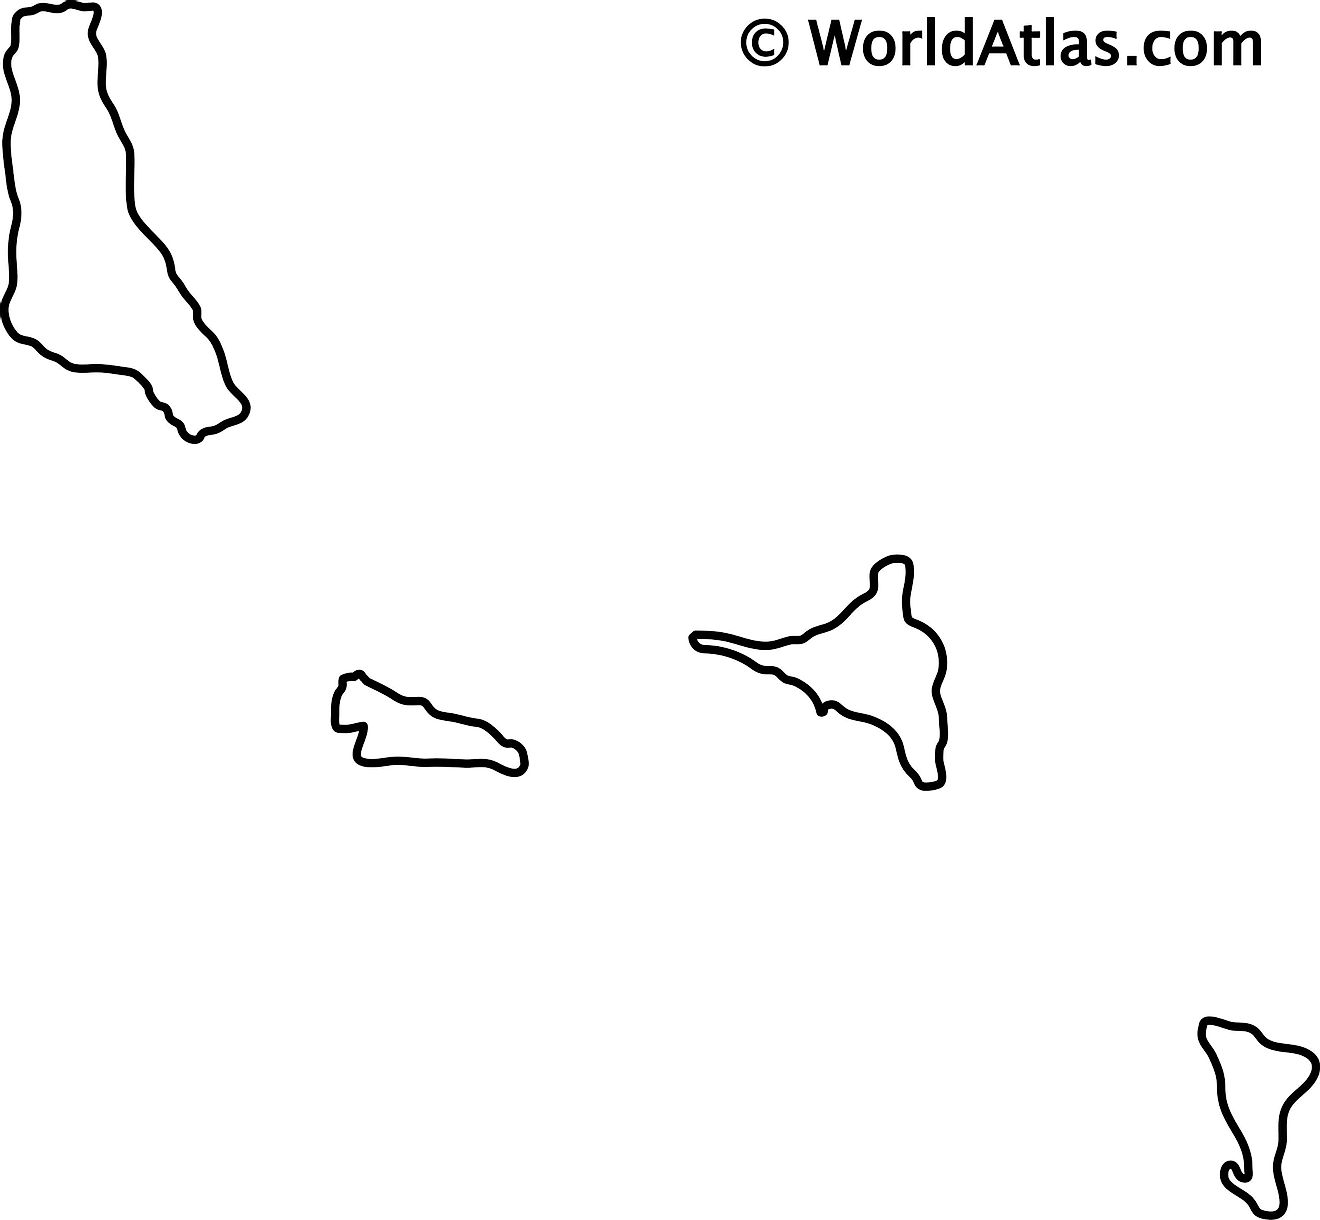 Blank Outline Map of Comoros